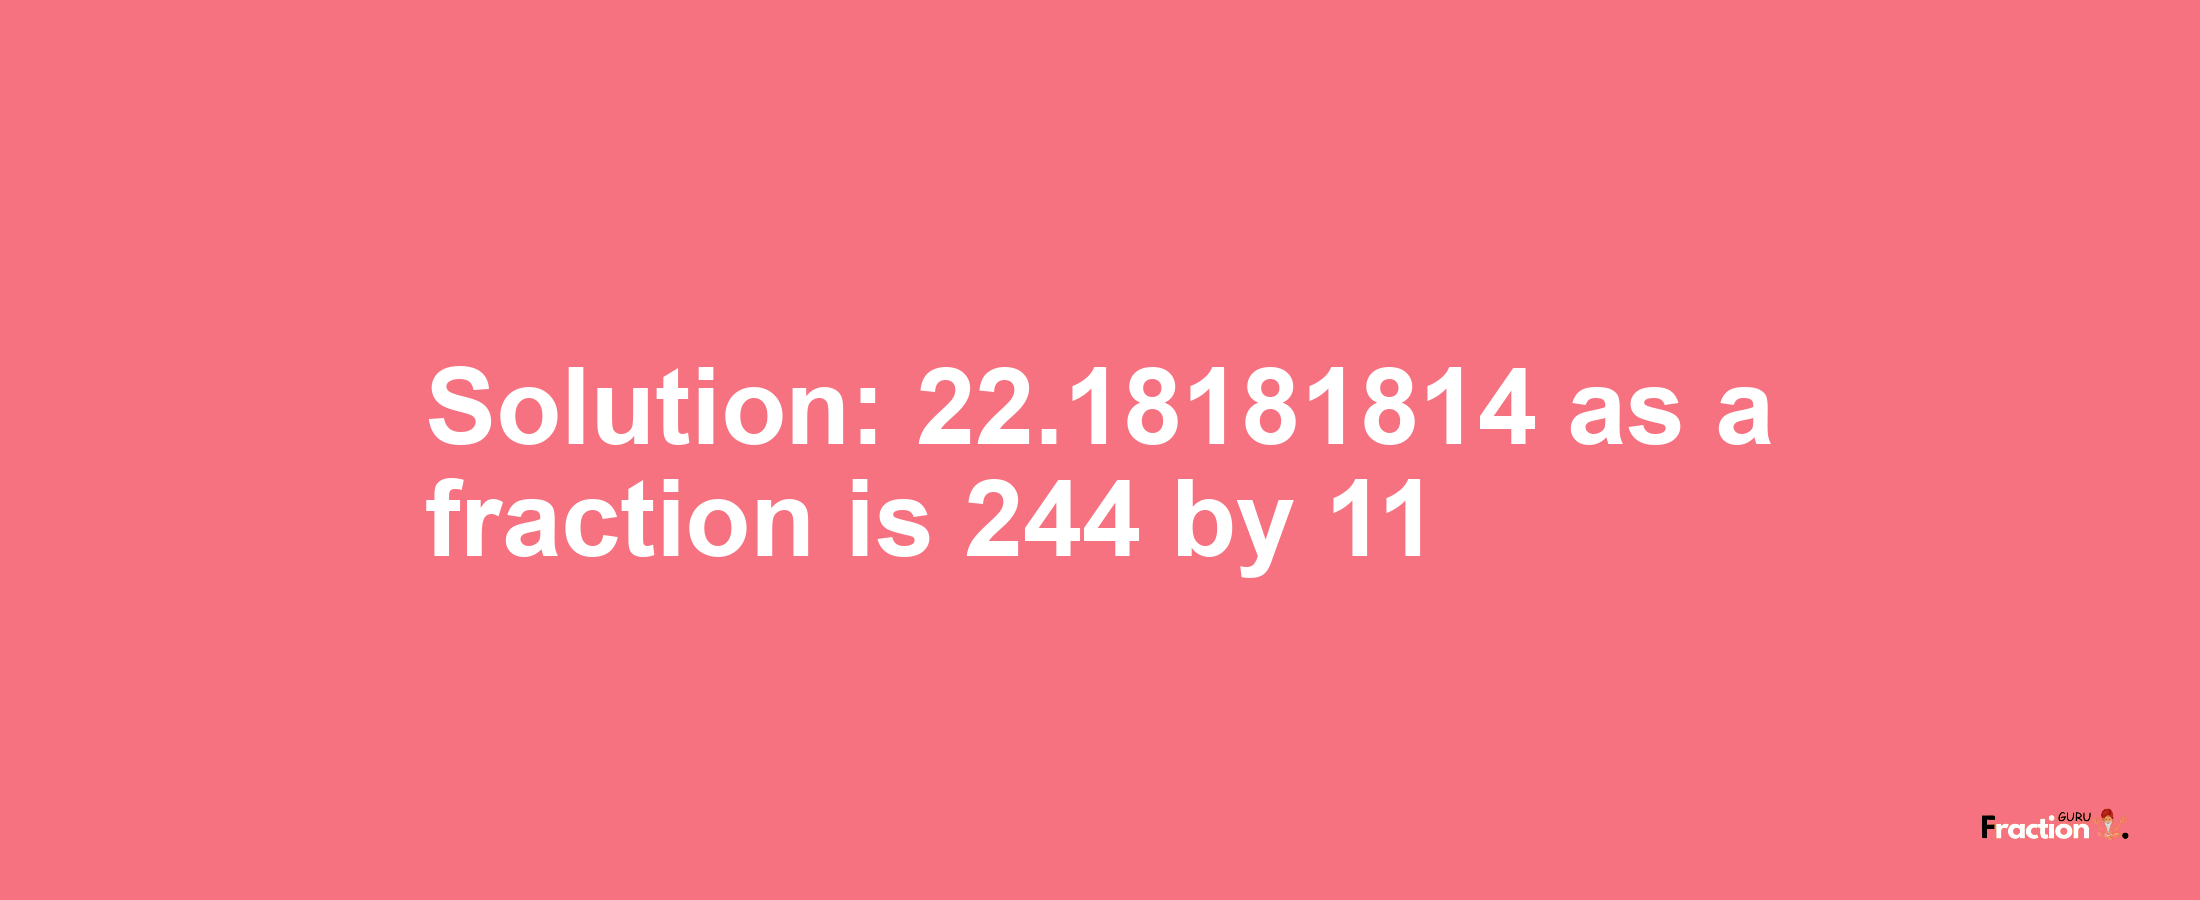 Solution:22.18181814 as a fraction is 244/11